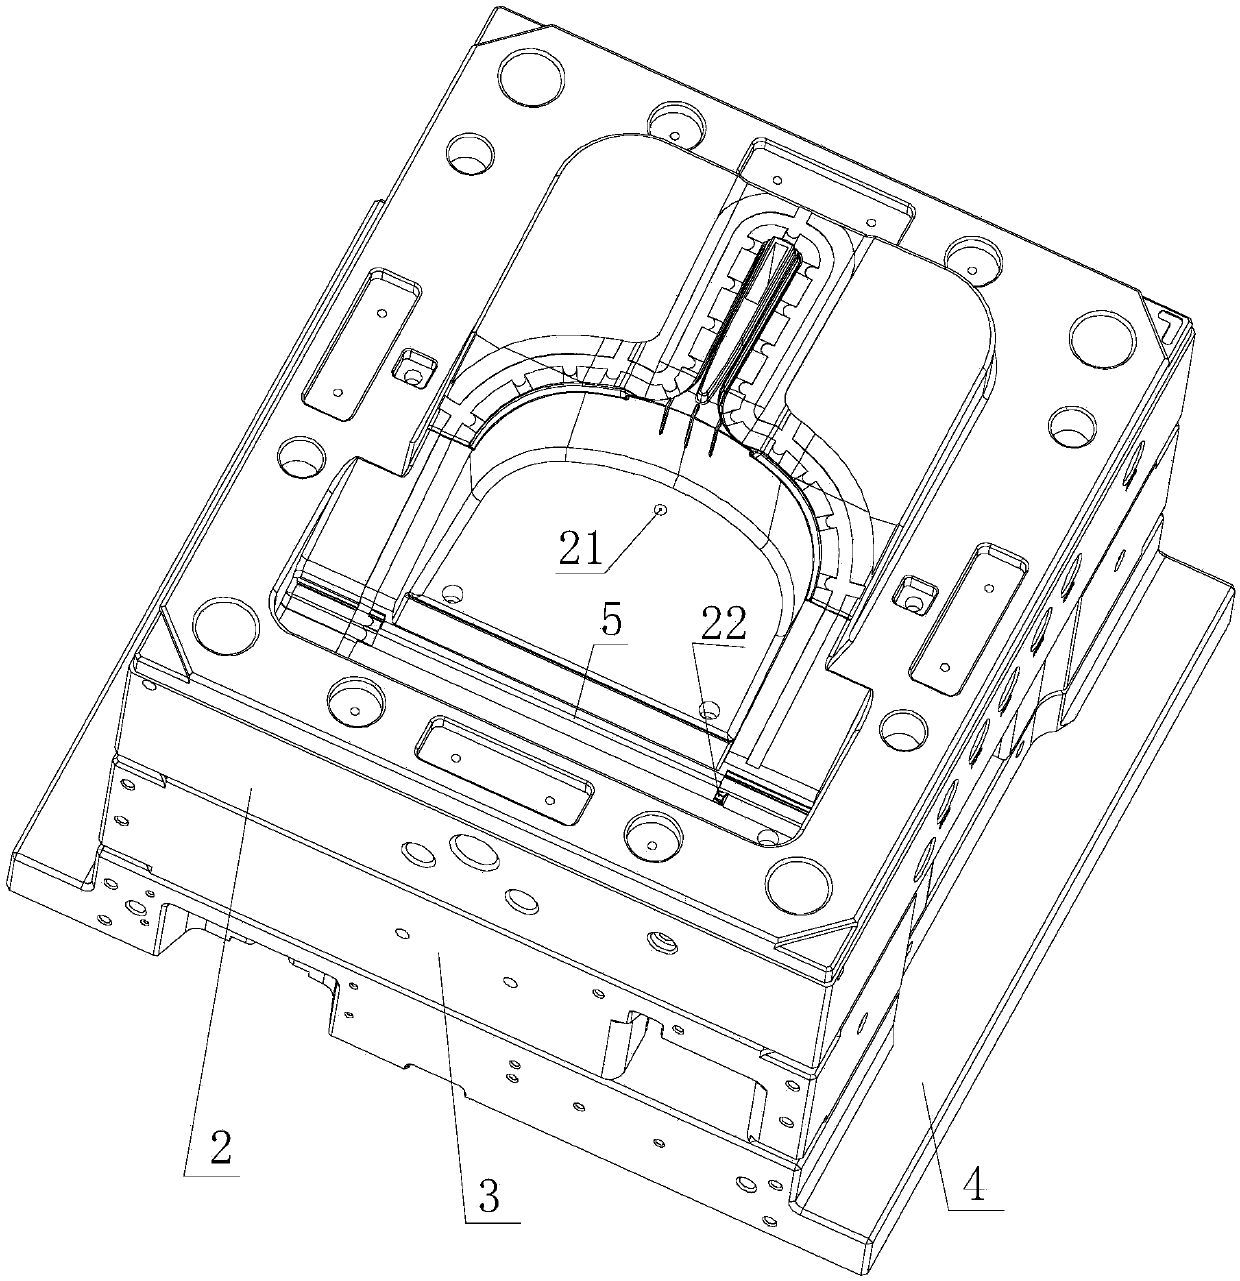 A single-cavity molding twice-sealing mechanism of an injection mold